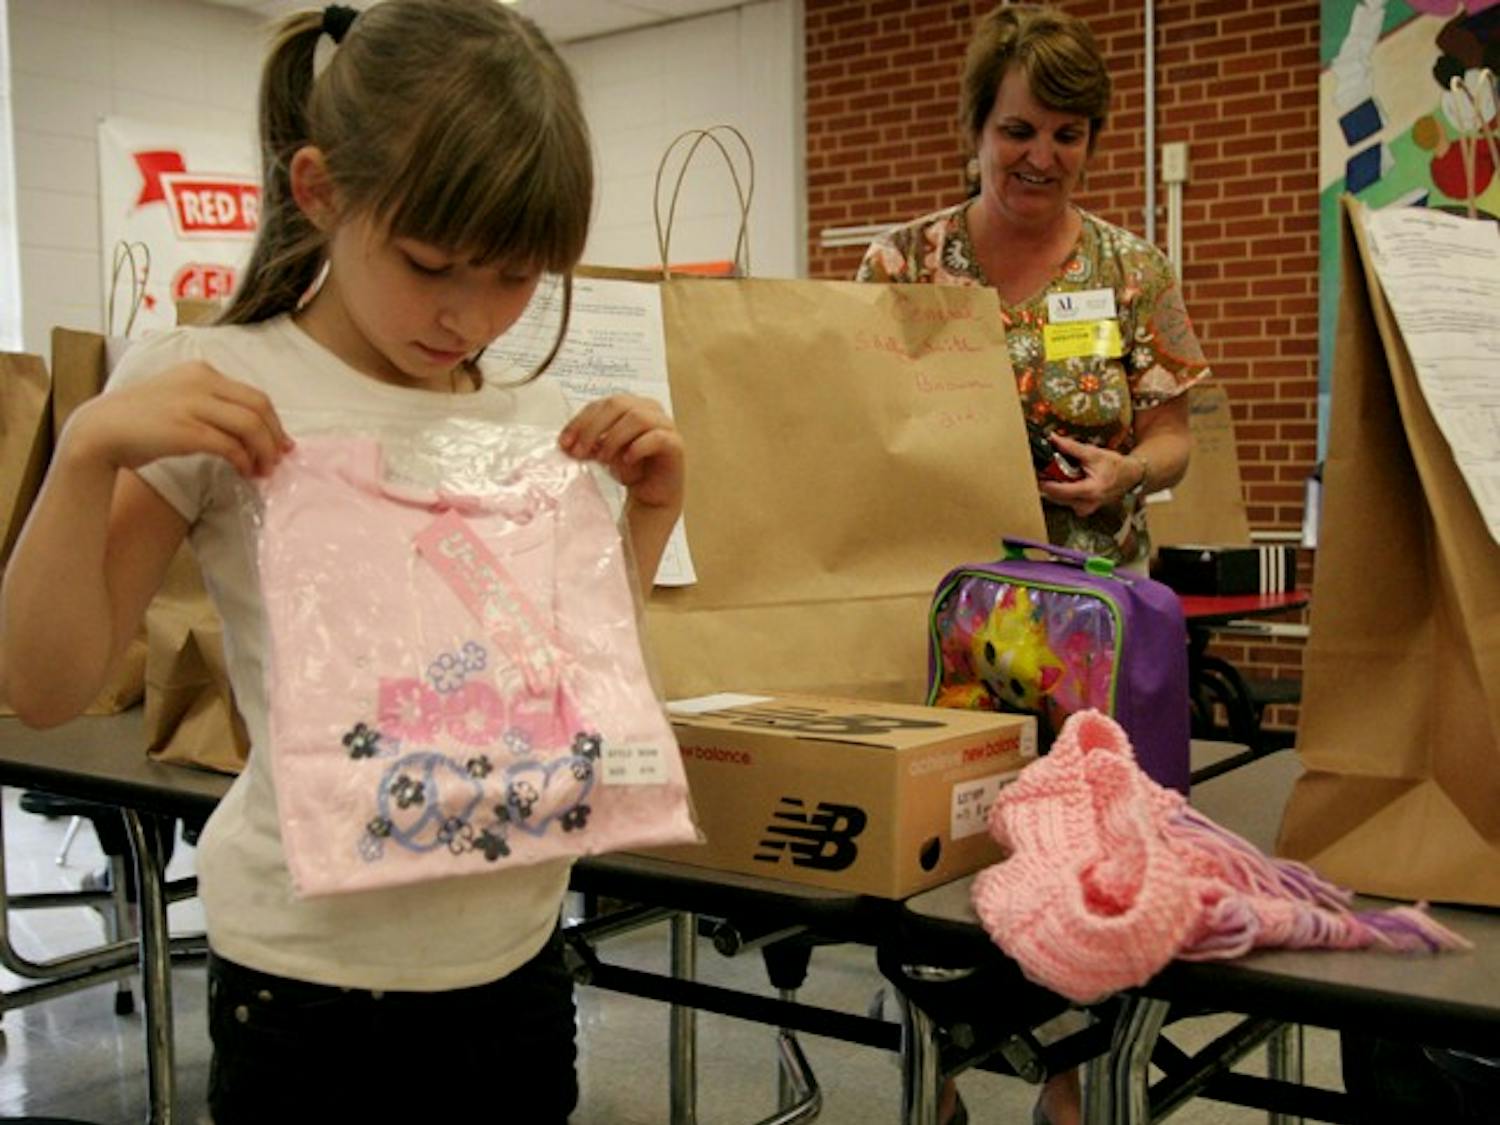 Shelly Smith,7, holds up a pink shirt she got from Operation School Bell, a program run by the Assistance League of the Triangle area.